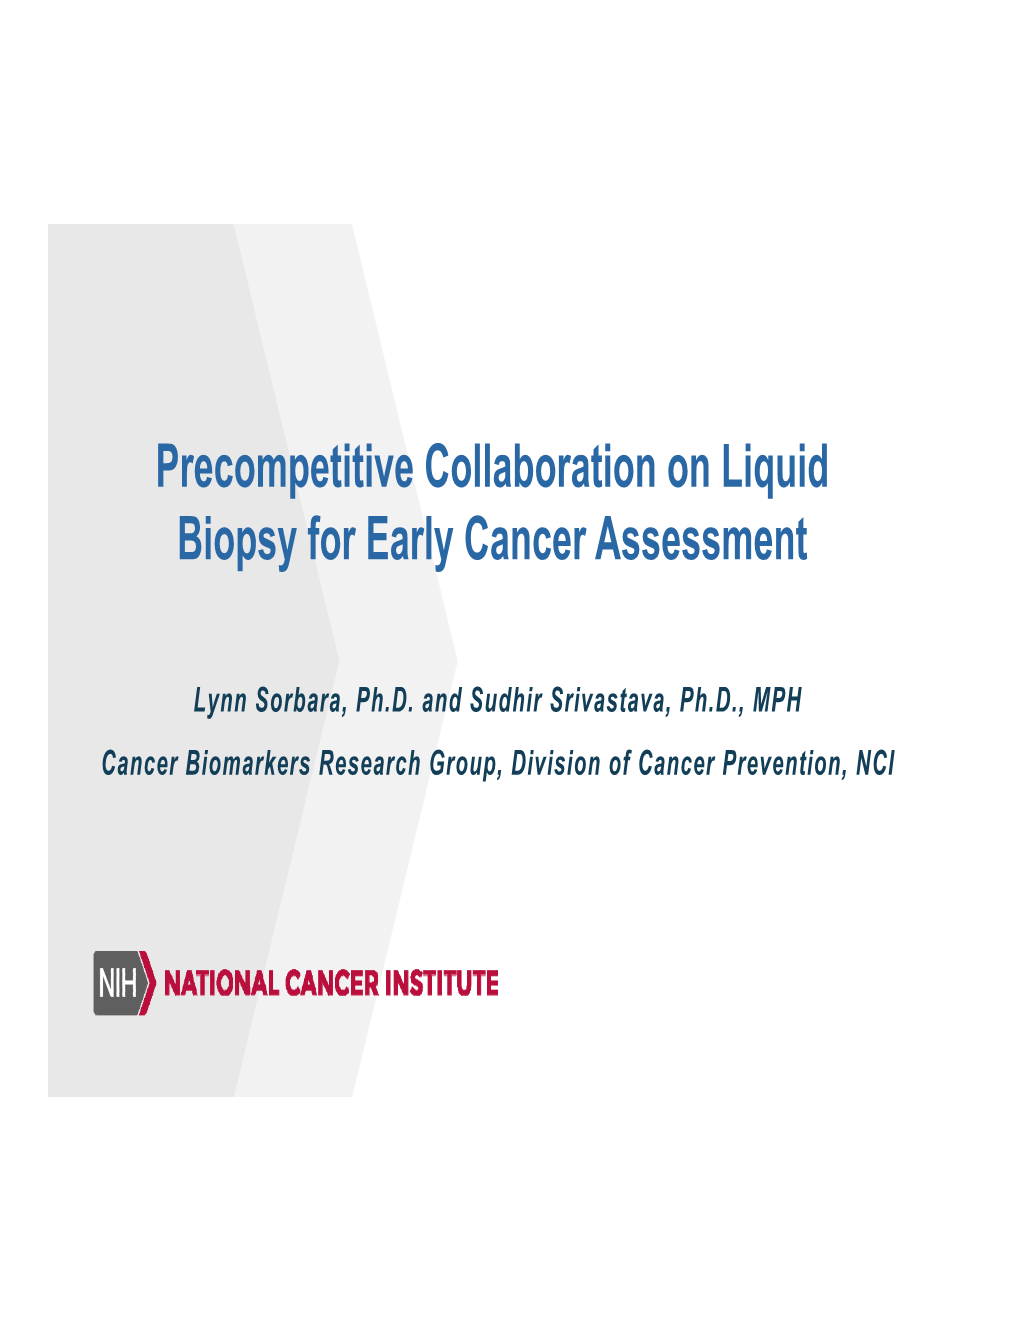 Precompetitive Collaboration on Liquid Biopsy for Early Cancer Assessment